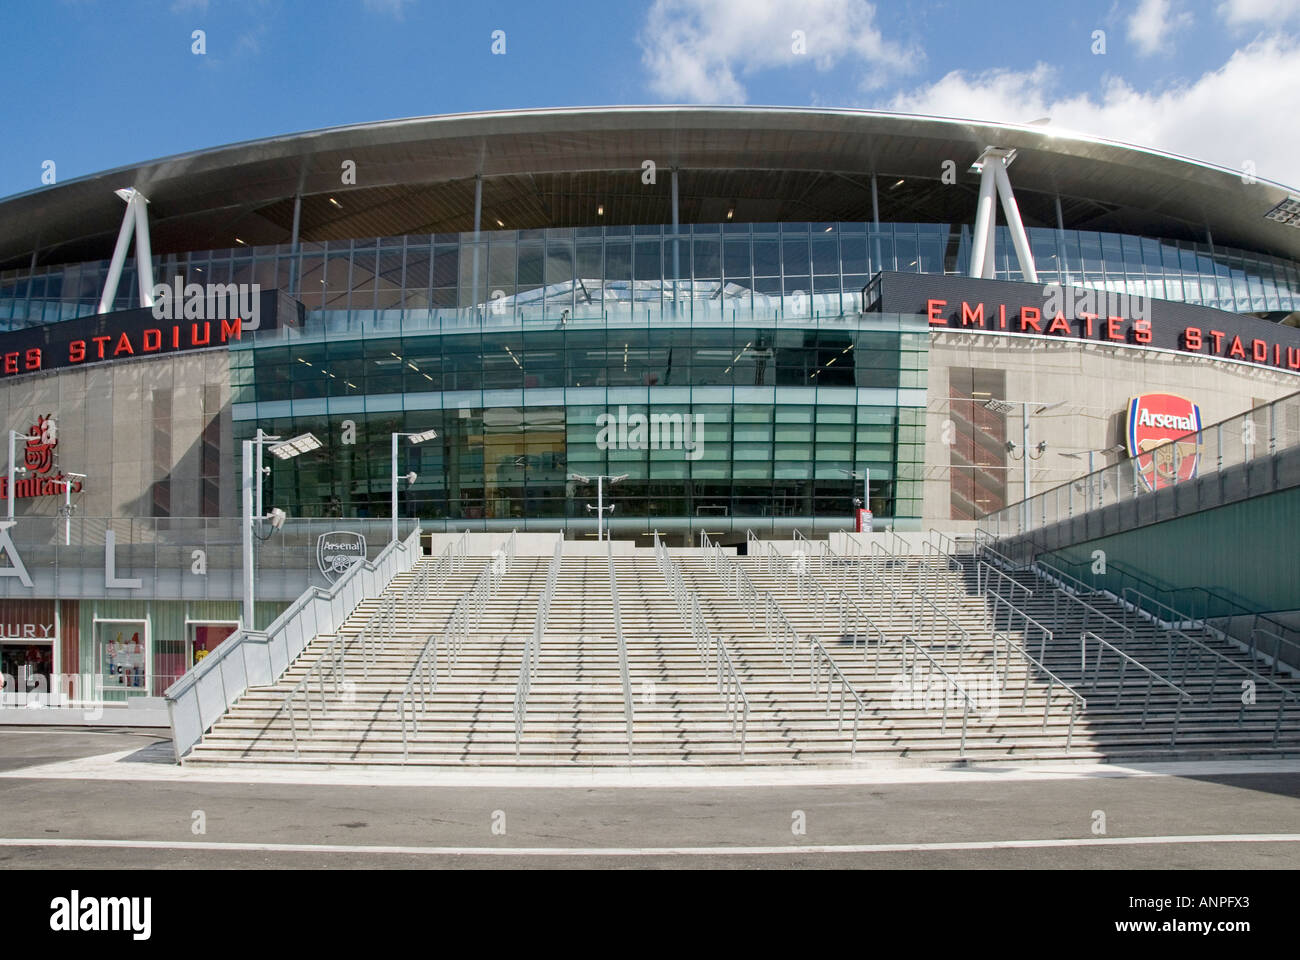 Wide stairway of steps & crowd control barriers at Arsenal FC modern design of Emirates Premier League football stadium building Holloway London UK Stock Photo